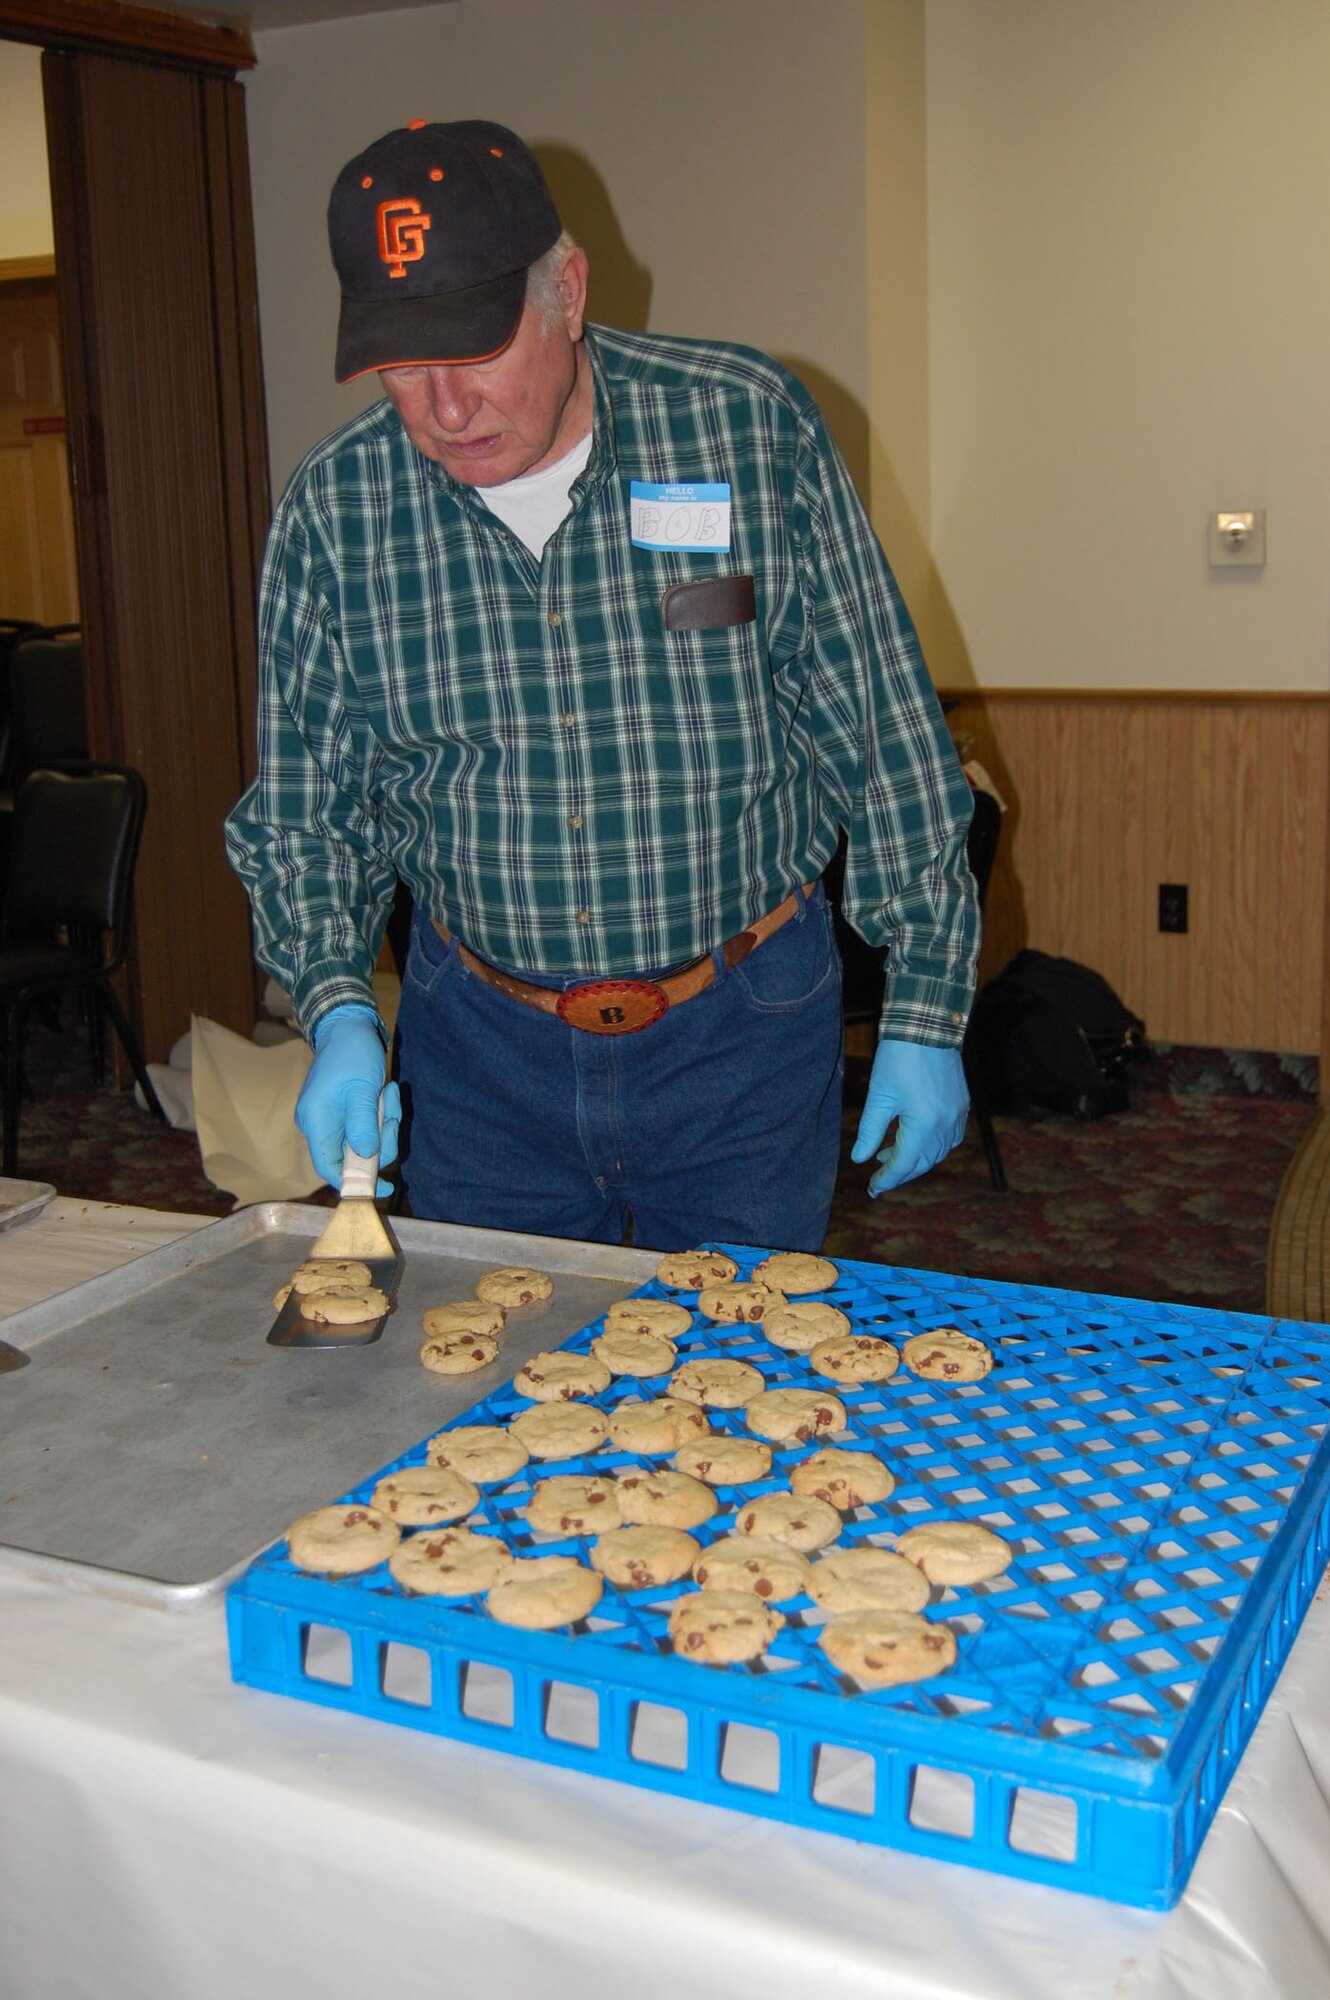 Bob Smith removes hot chocolate chip cookies onto a cooling rack during the first day of baking at the VFW Dec. 1. The group started at 6 a.m. and by 12:30 p.m., they had baked, cooled and packaged 292 dozen cookies. (U.S. Air Force photo/Valerie Mullett)